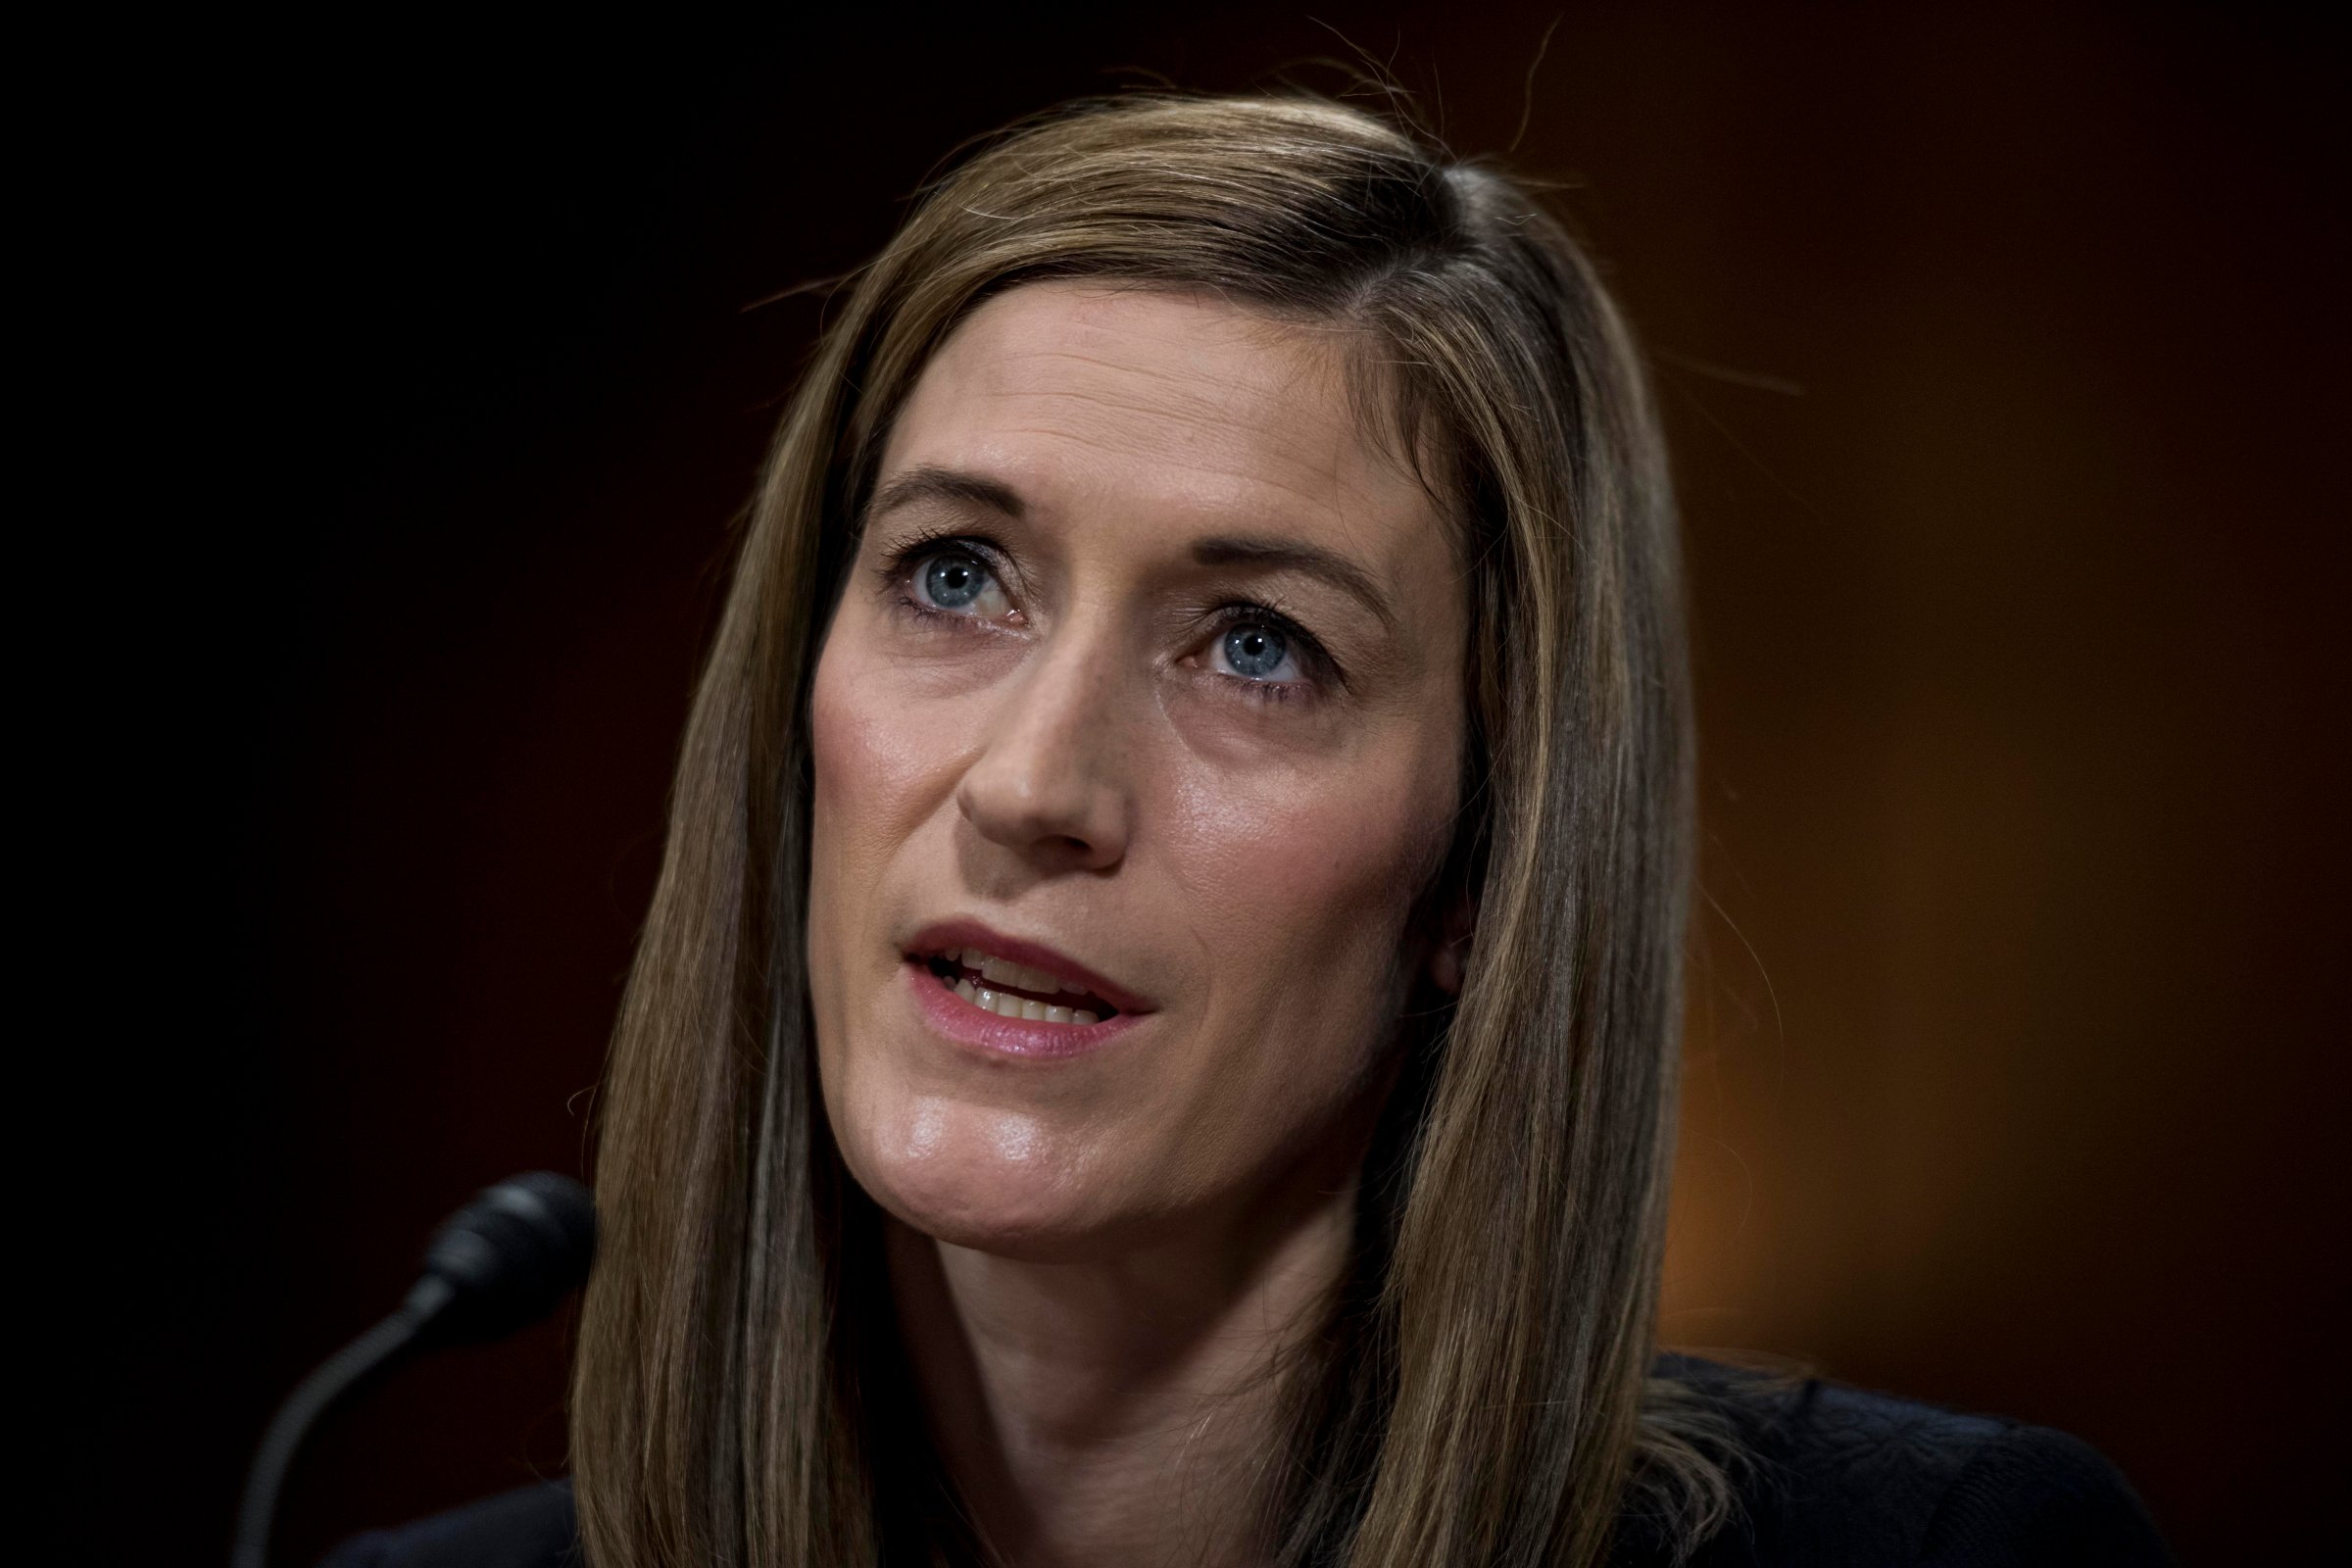 Nominees for Deputy Attorney General, Rod Rosenstein,  and Rachel Brand nominated for Associate Attorney General